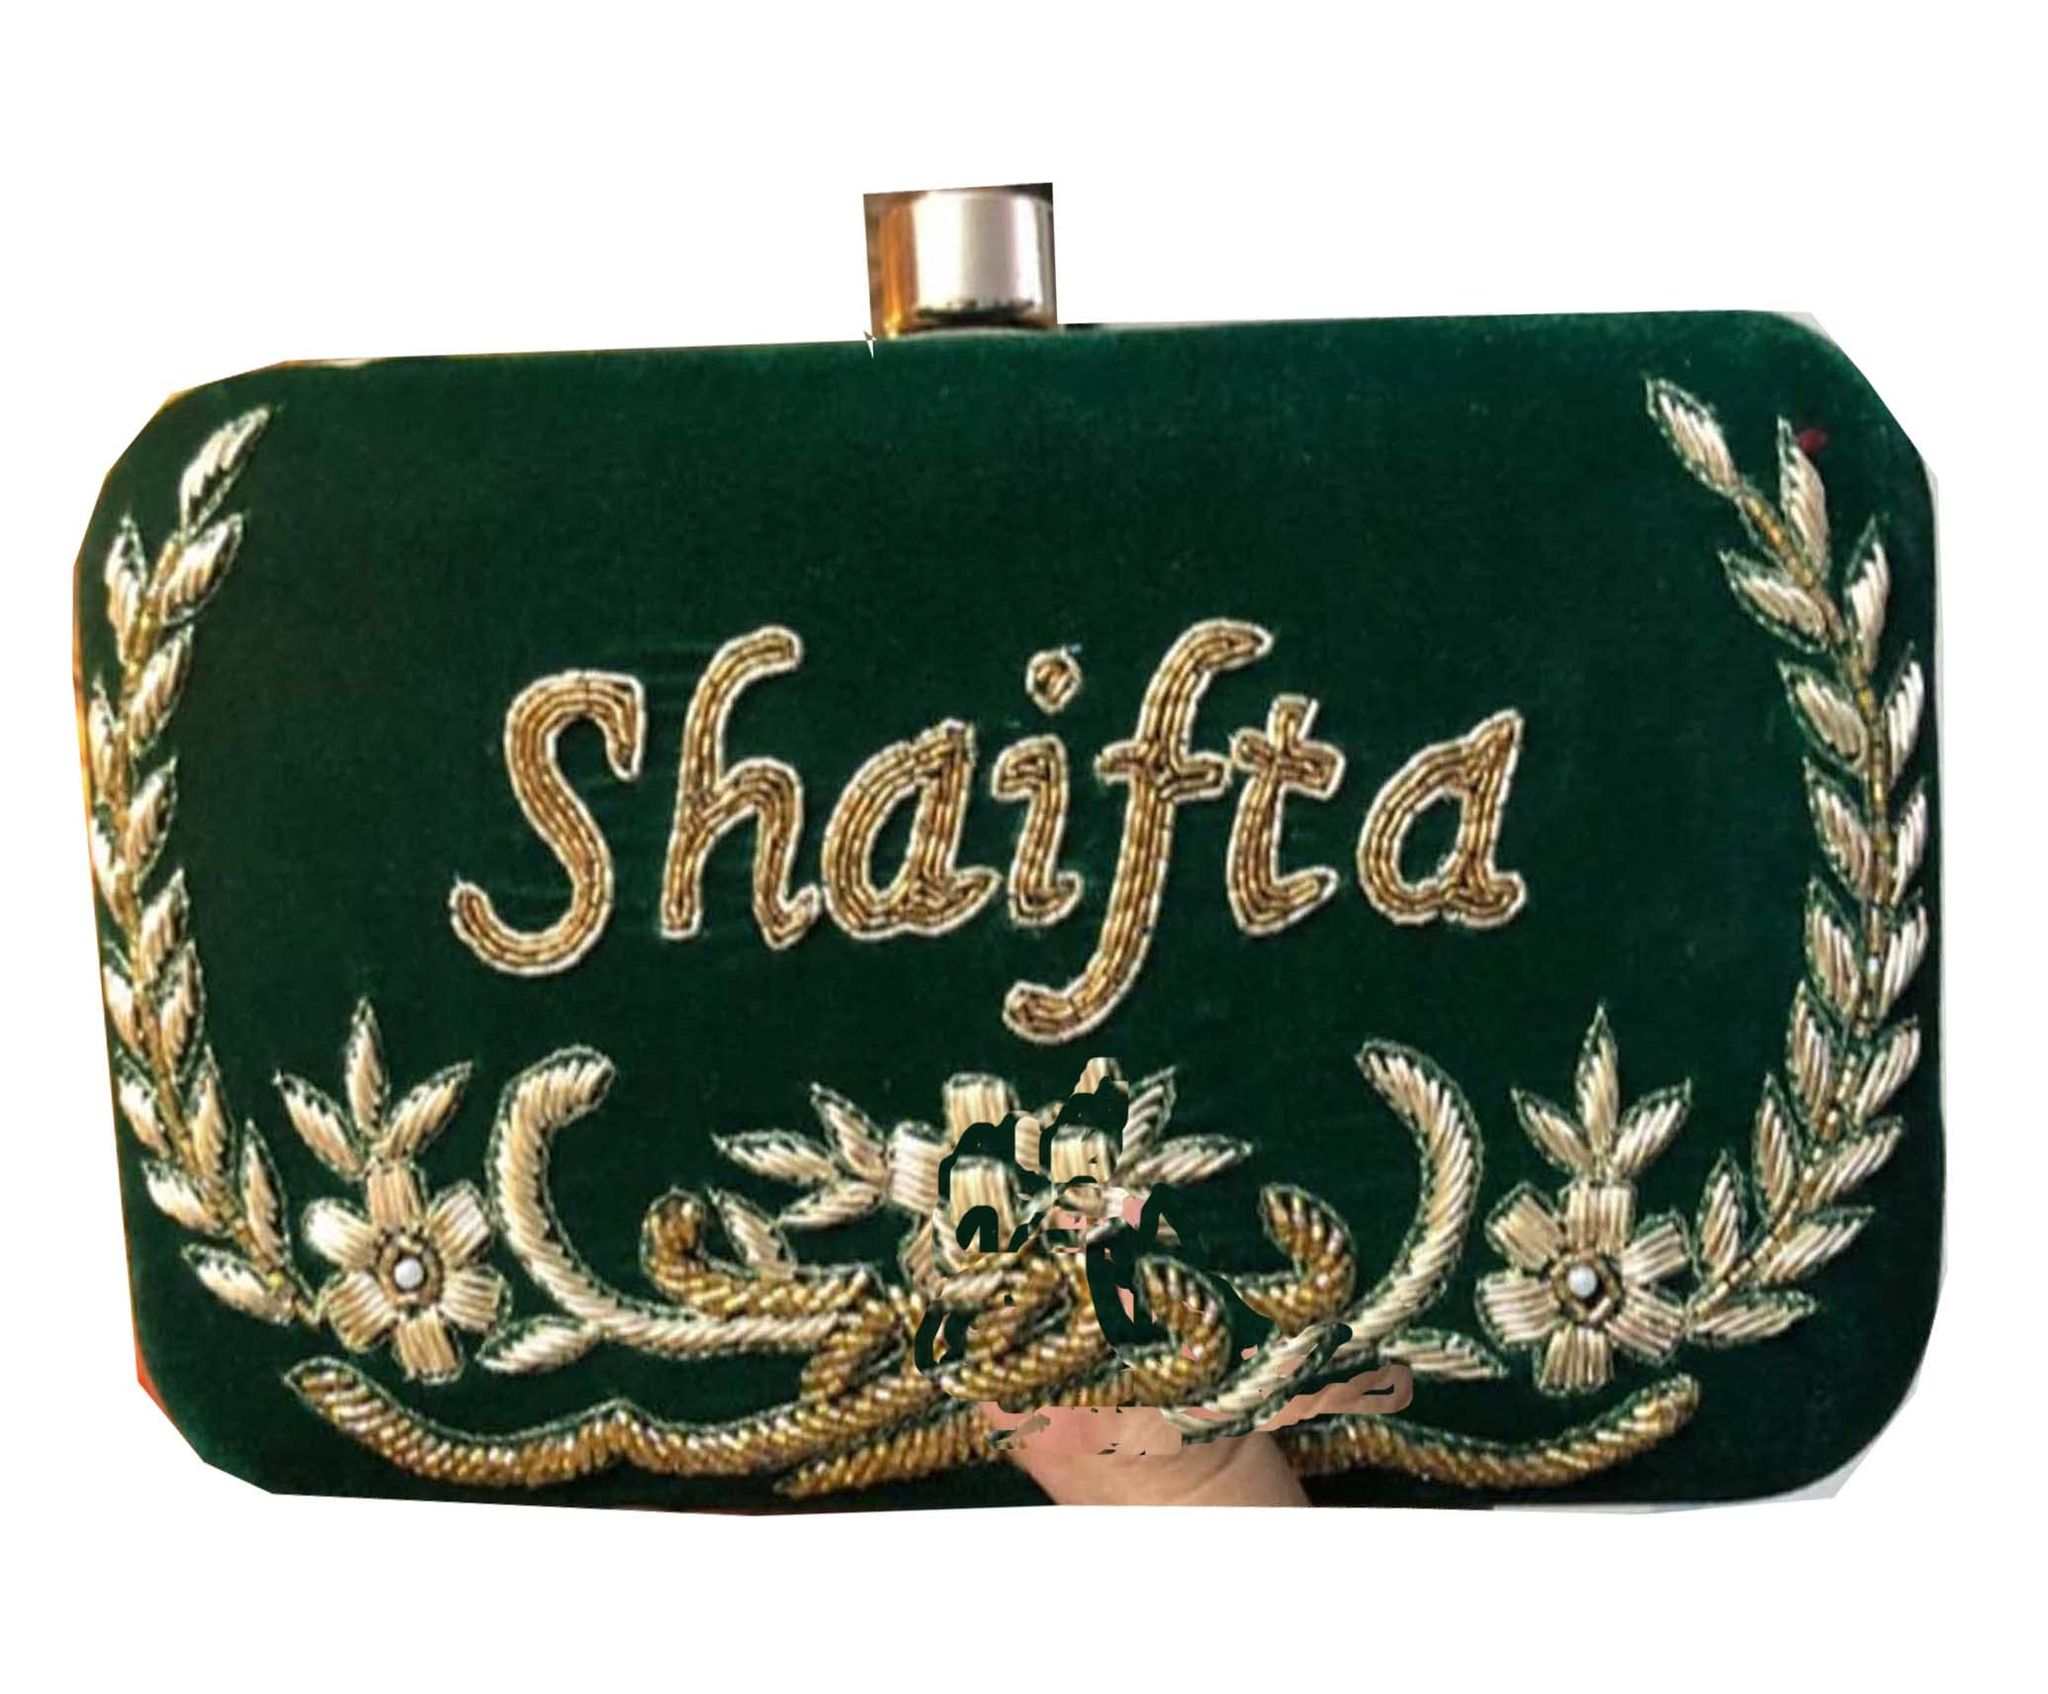 Personalized Velvet Purse, Evening Clutch, Gift For Her, Gift For Sister